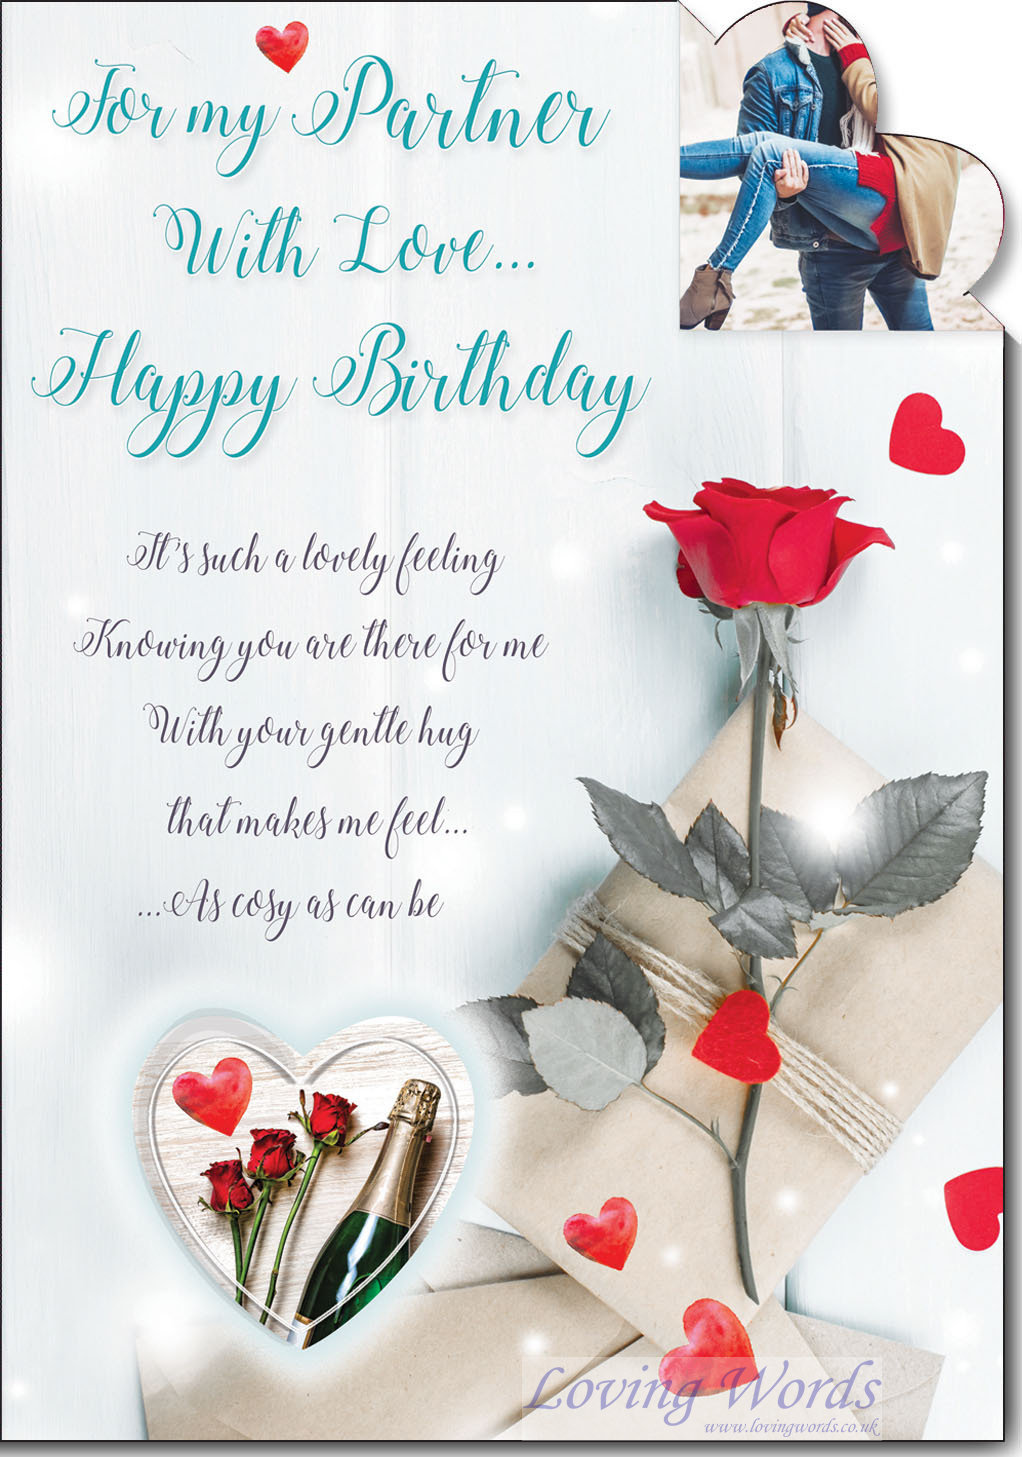 With Love Partner Birthday | Greeting Cards by Loving Words